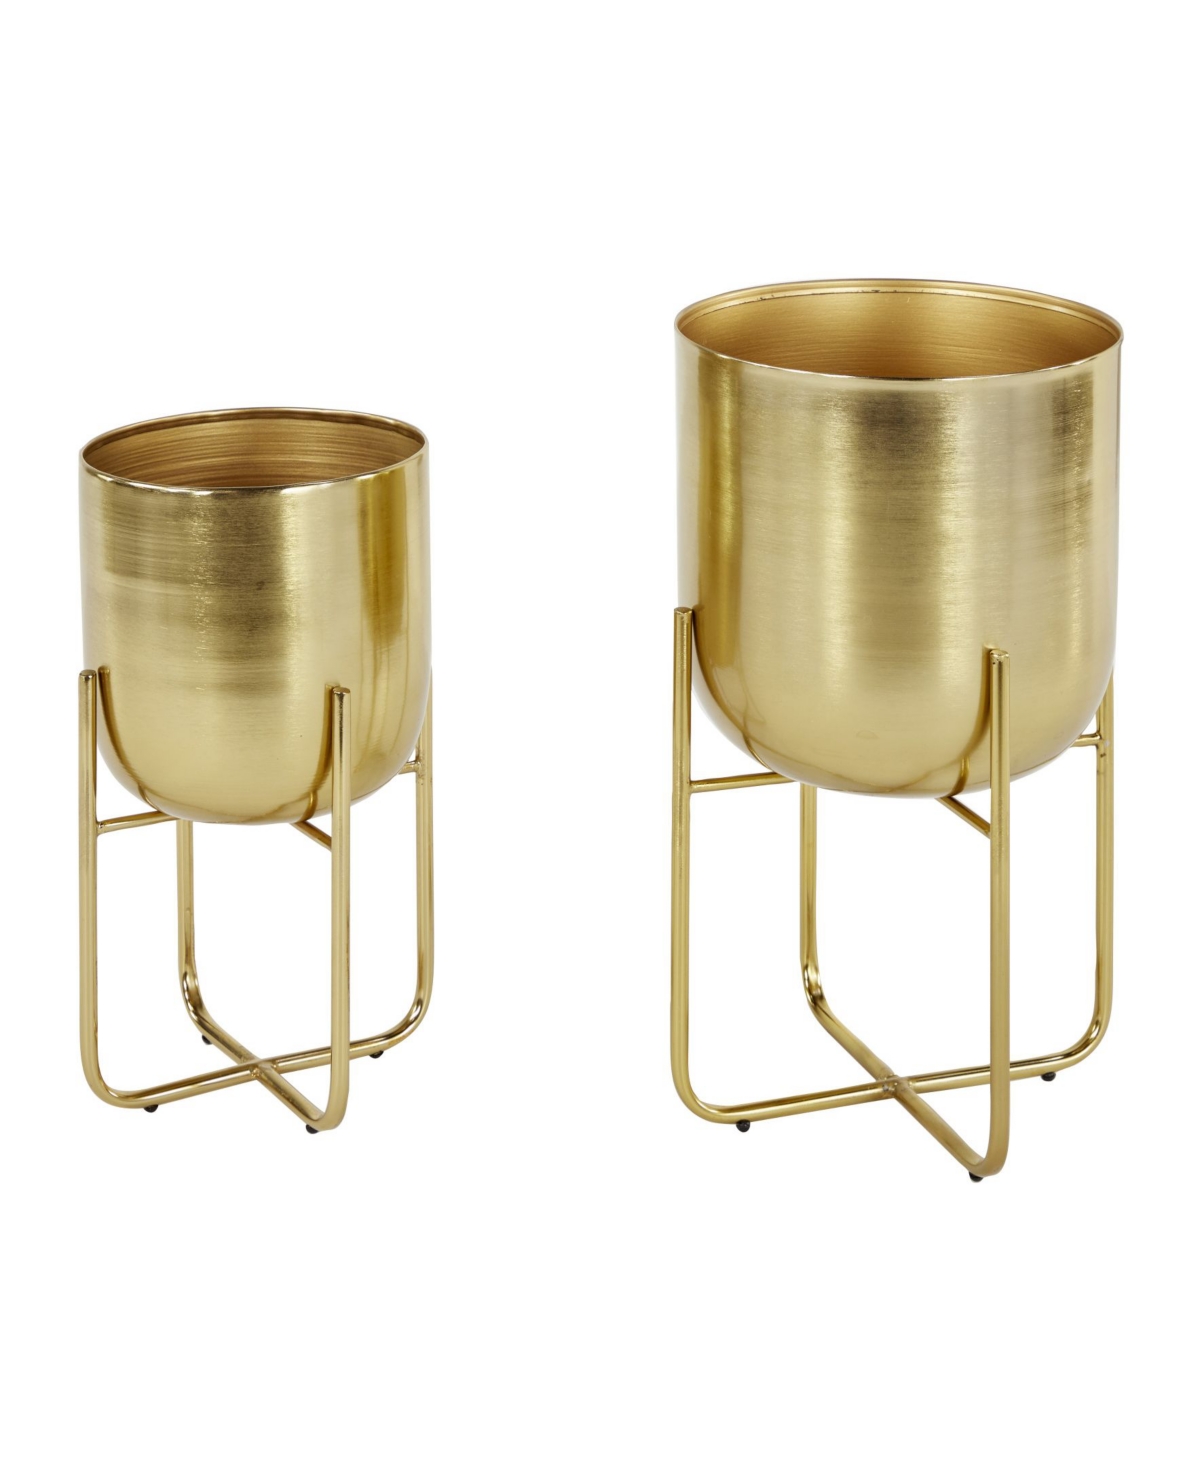 Contemporary Style Large Round Metallic Planters in Stands, Set of 2 - Gold-tone